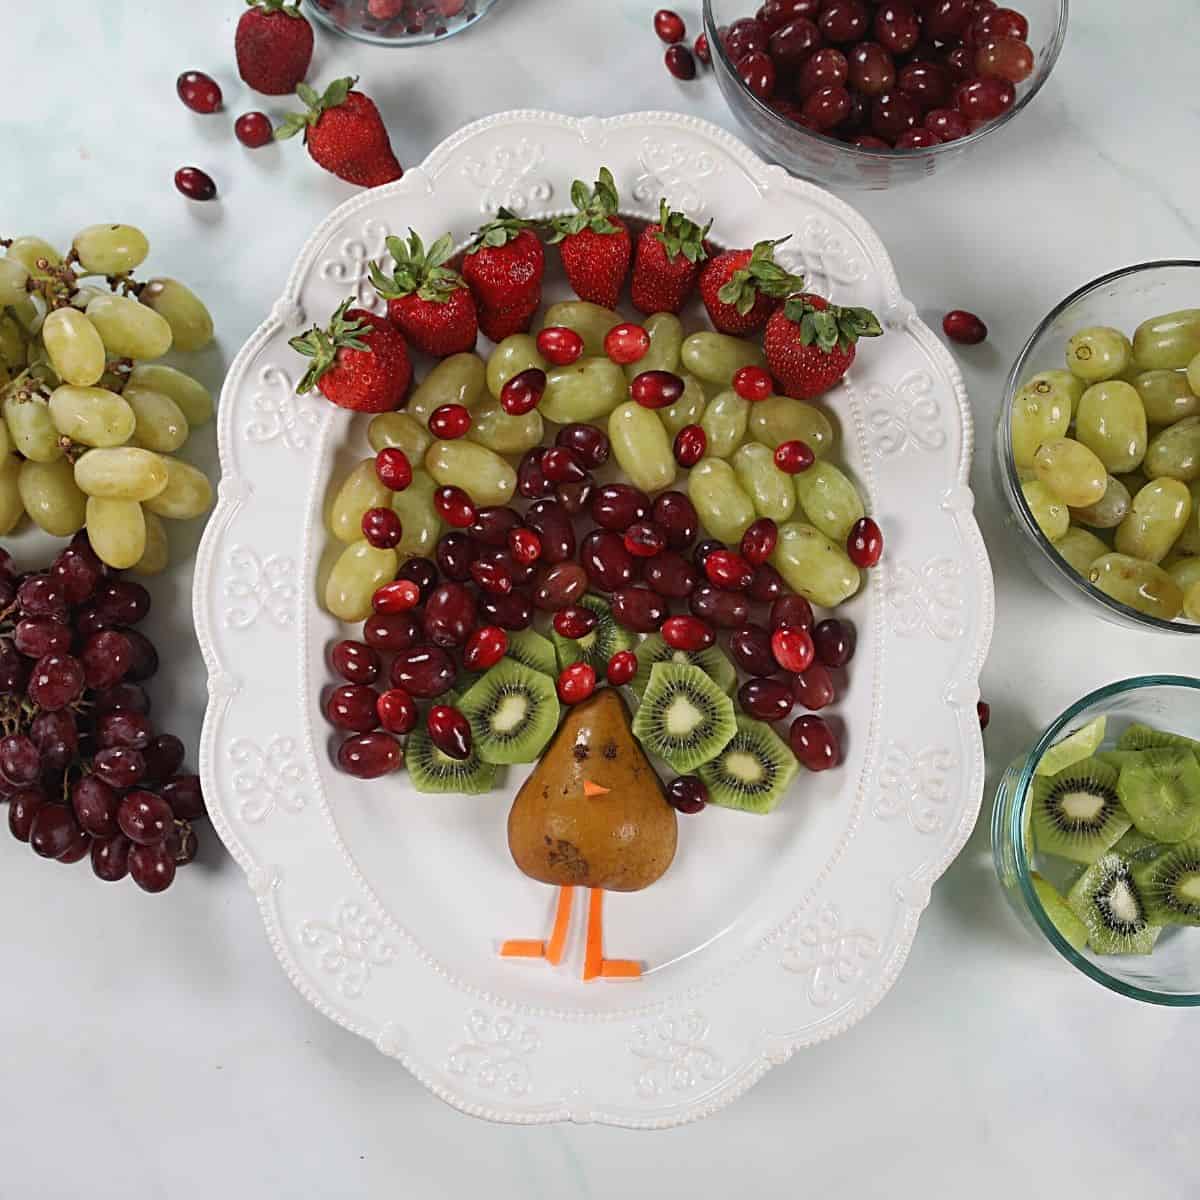 Fruit arranged to look like feathers of a turkey on a white platter.